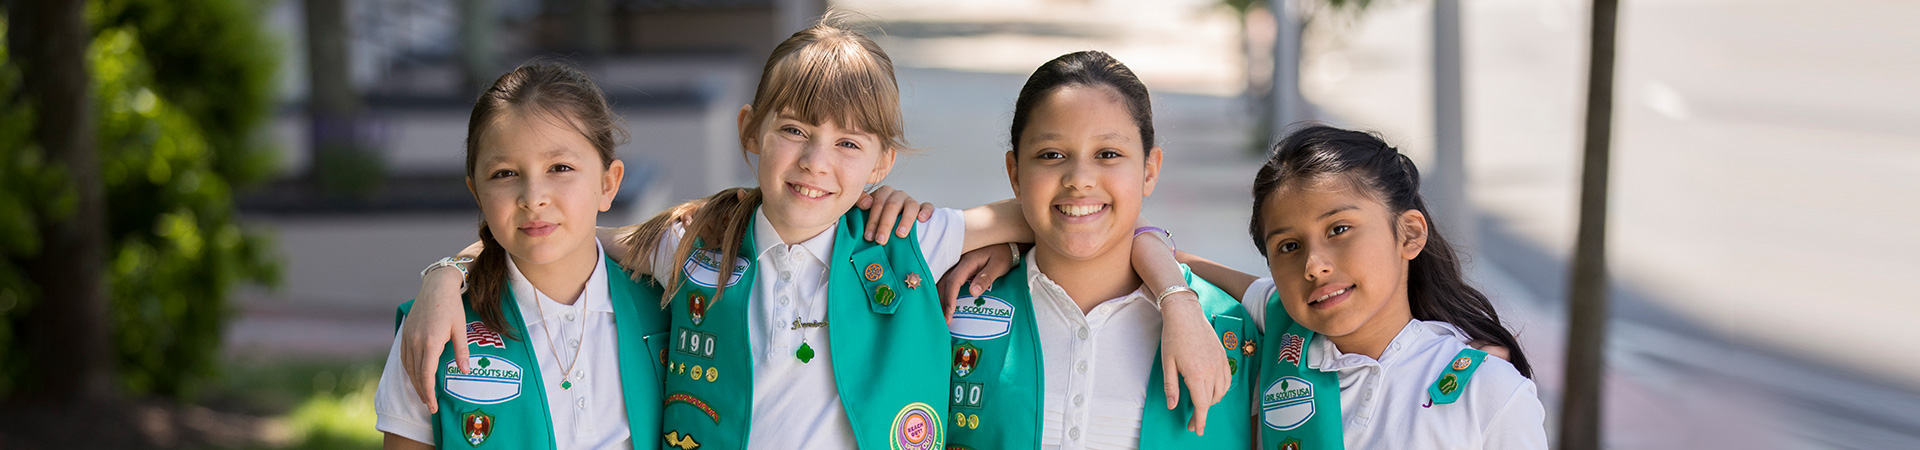  portrait of ambassador girl scout wearing vest and smiling at camera in front of a brick building 